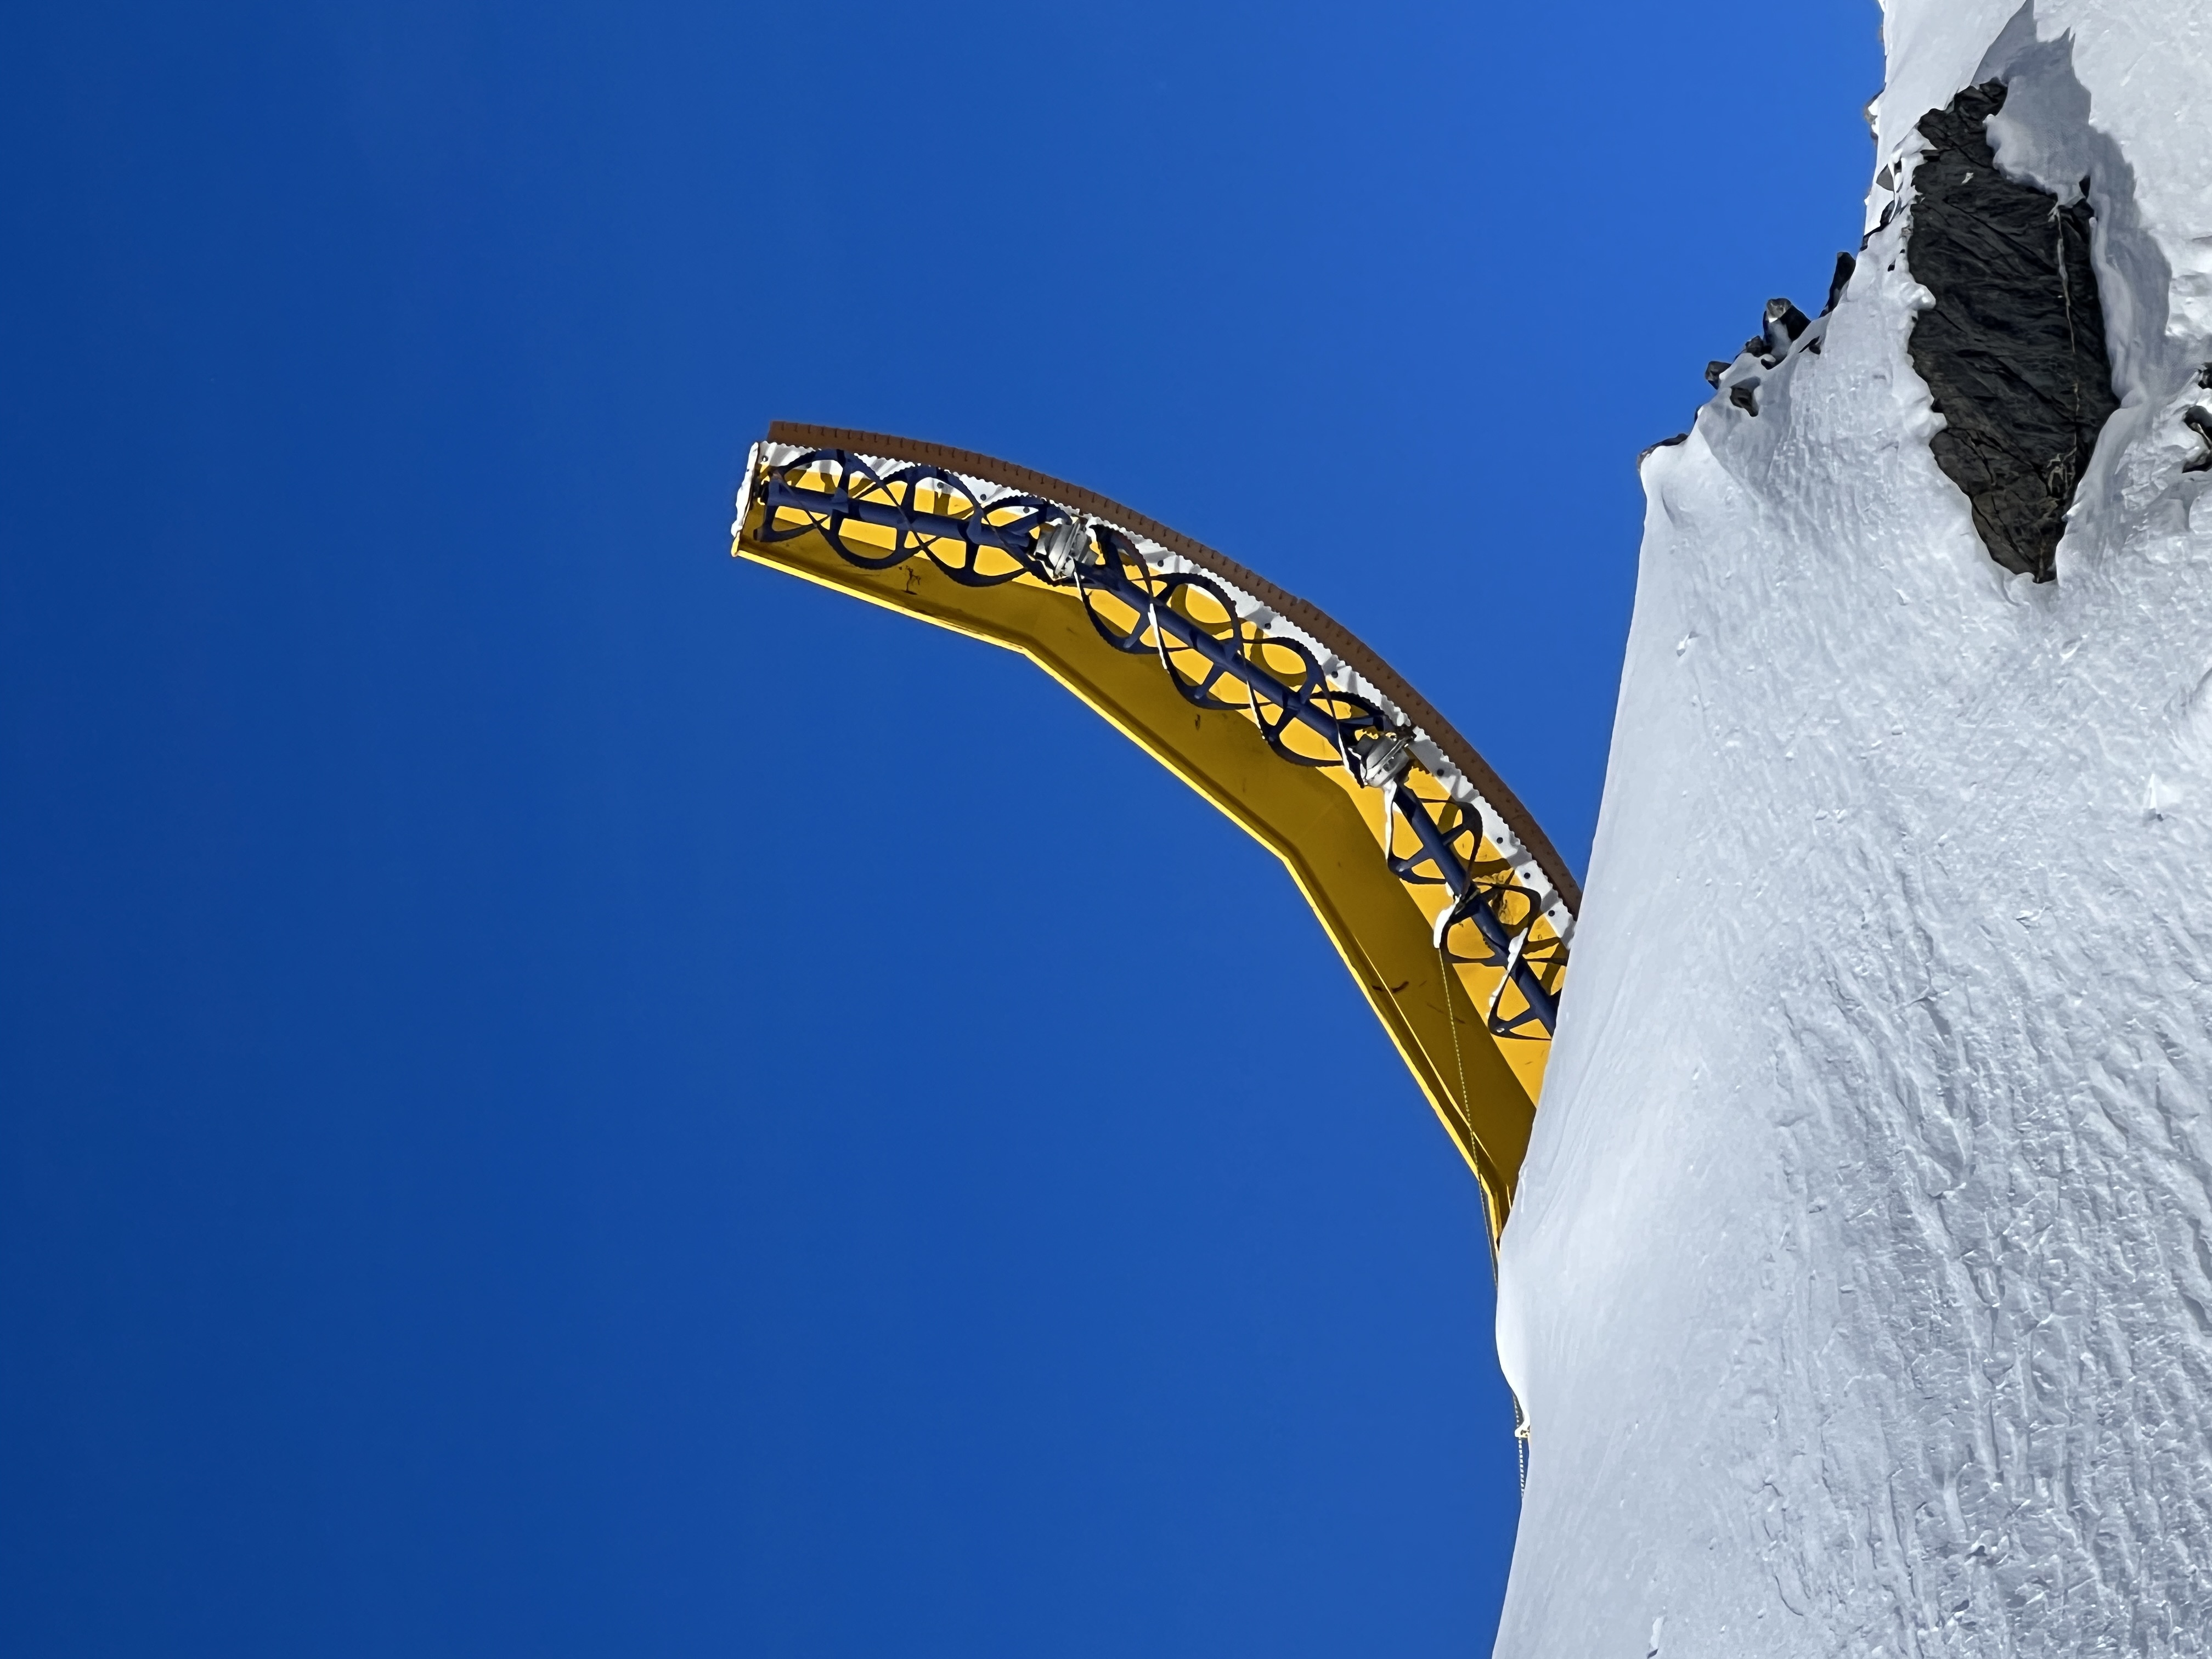 yellow crane surrounded by a blue sky and white snow